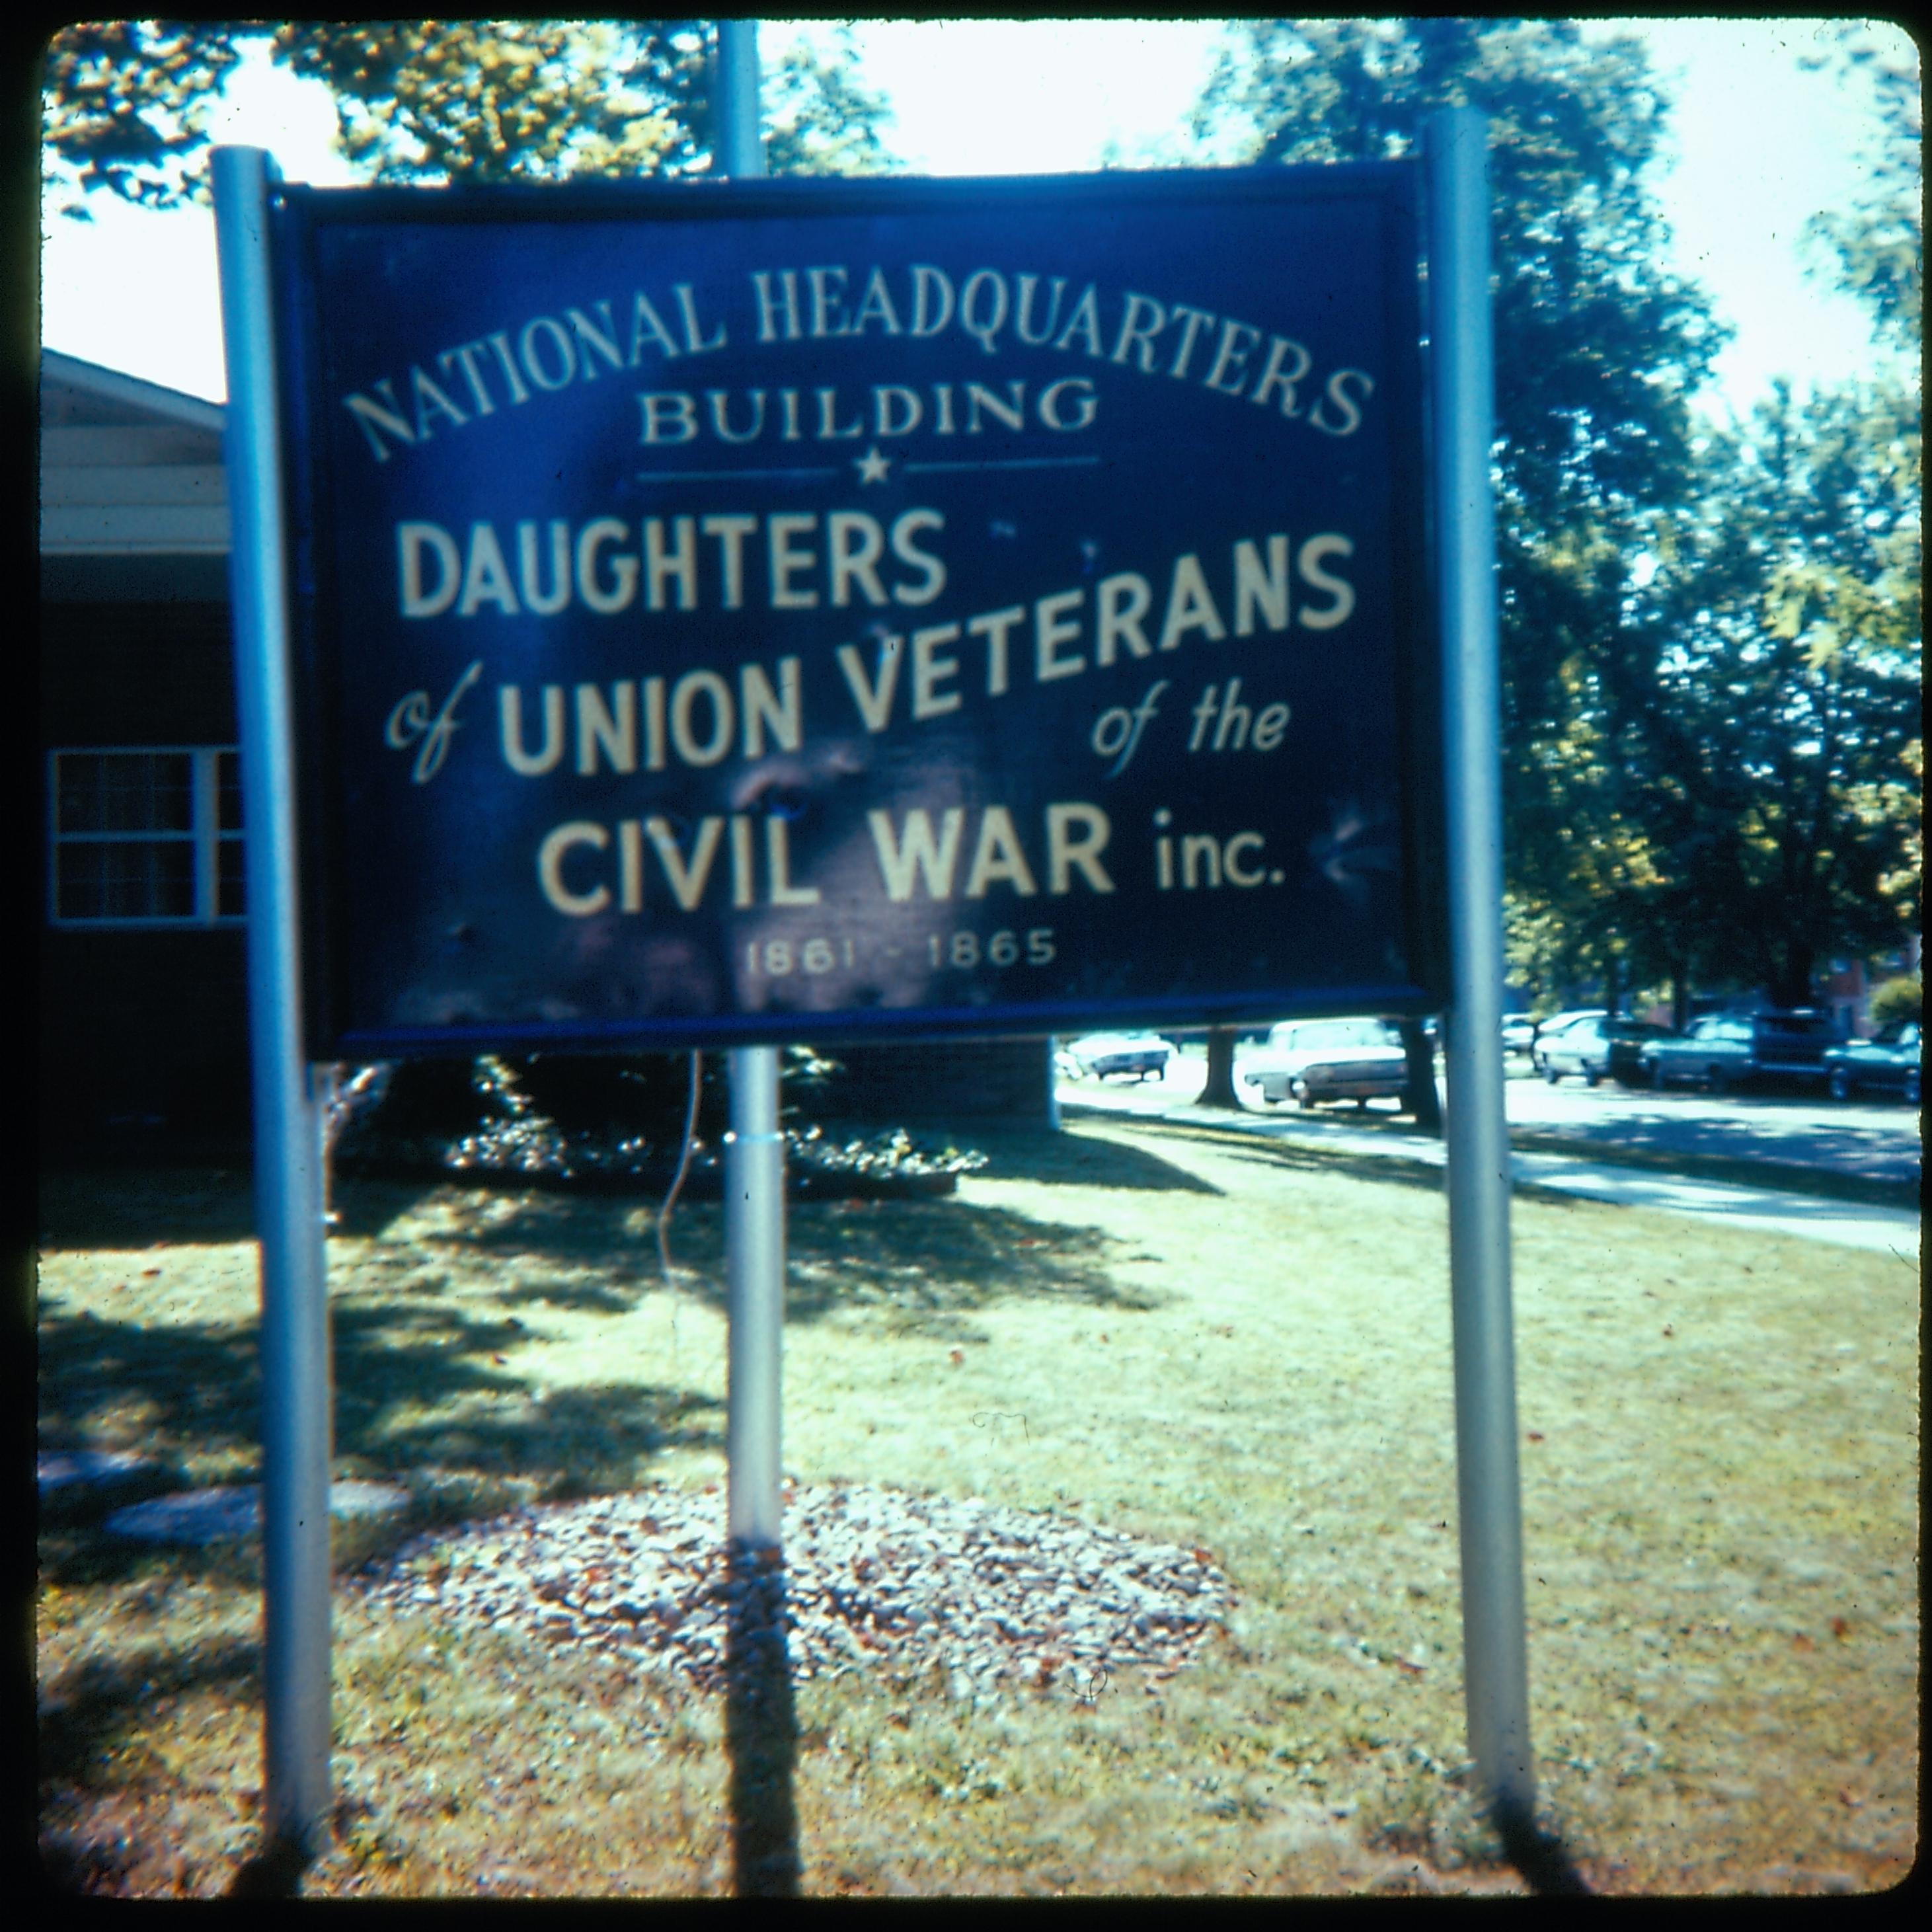 Daughters of the Union - Vets - Civil War Daughters of Union, Veterans, Civil War